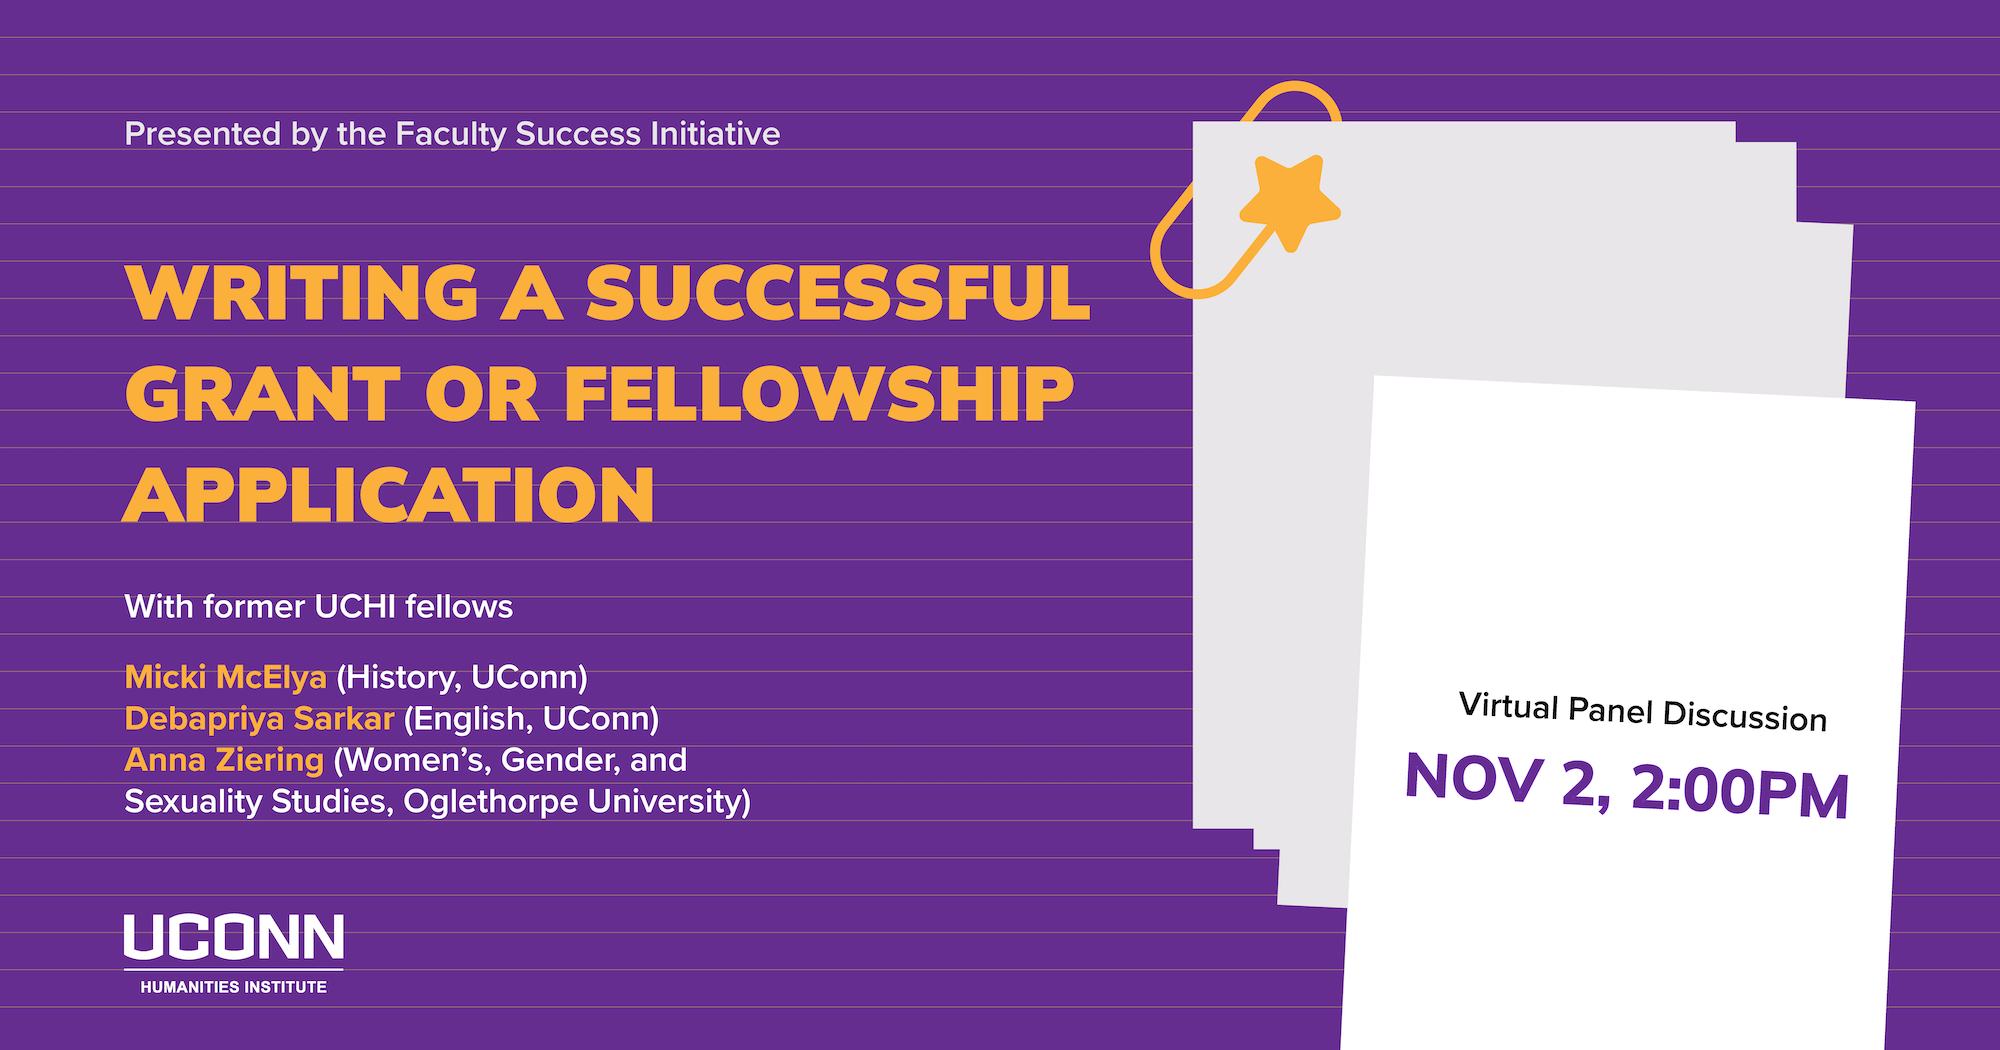 The Faculty Success Initiative Presents, Writing a Successful Grant or Fellowship Application, with former UCHI fellows Micki McElya, Debapriya Sarkar, and Anna Ziering. virtual panel discussion. November 2, 2:00pm.